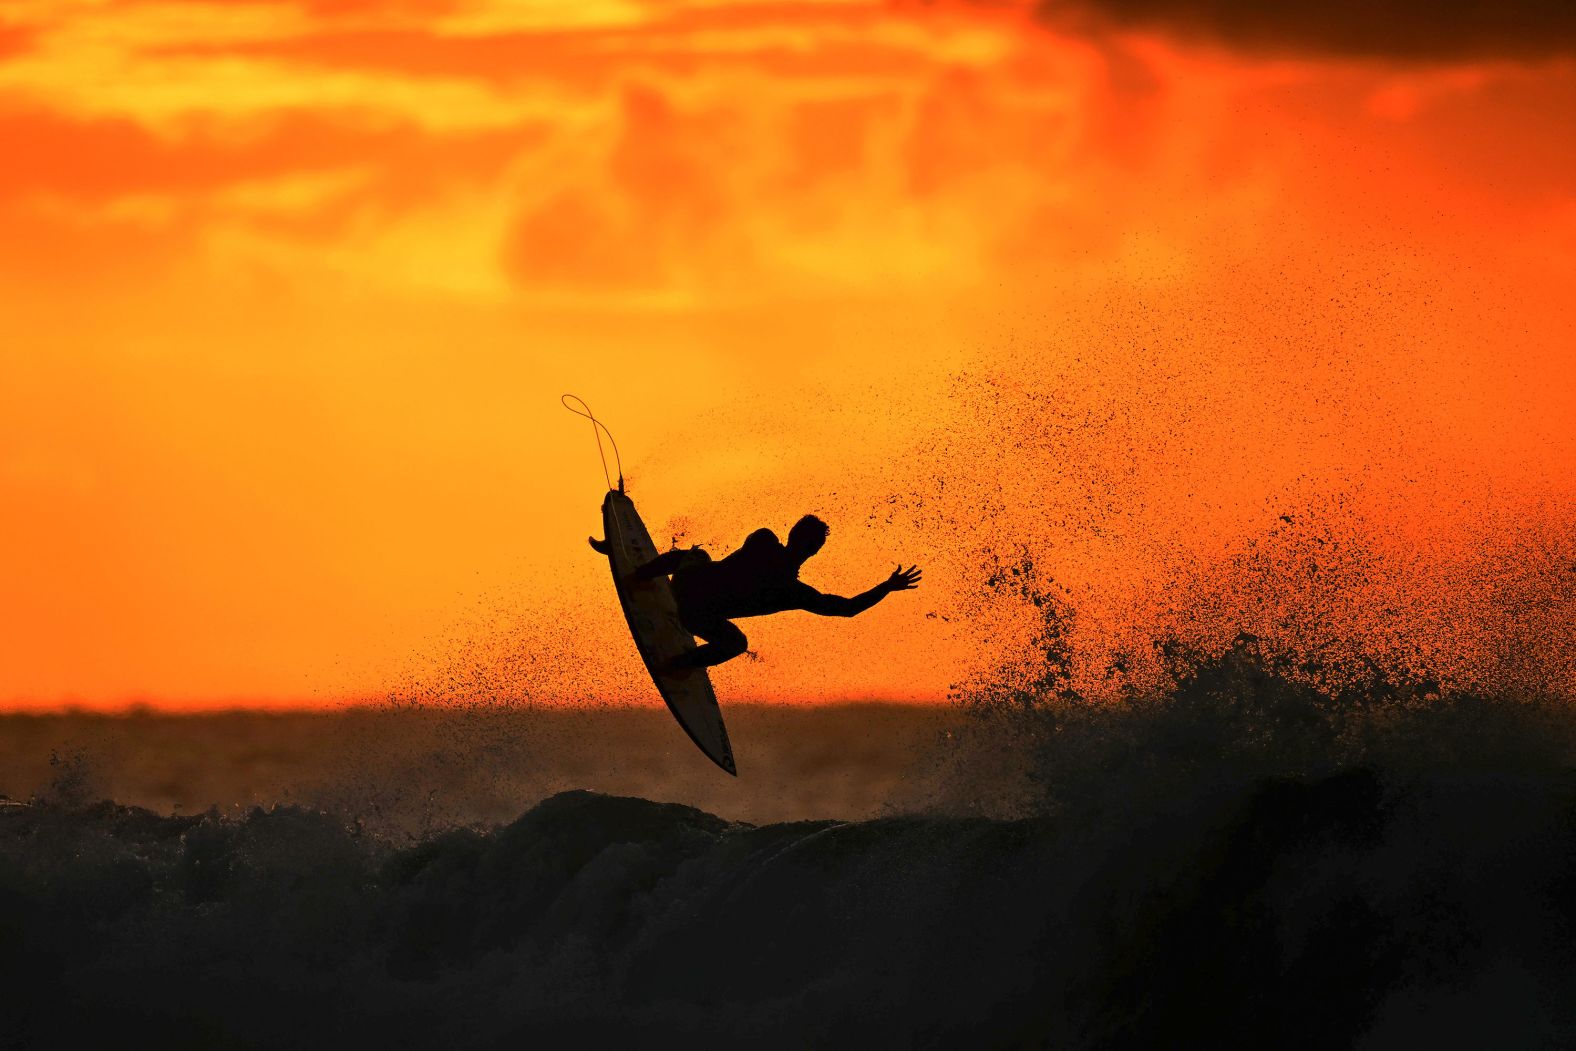 A surfer warms up at sunrise before a professional event in Bells Beach, Australia, on Wednesday, March 27.